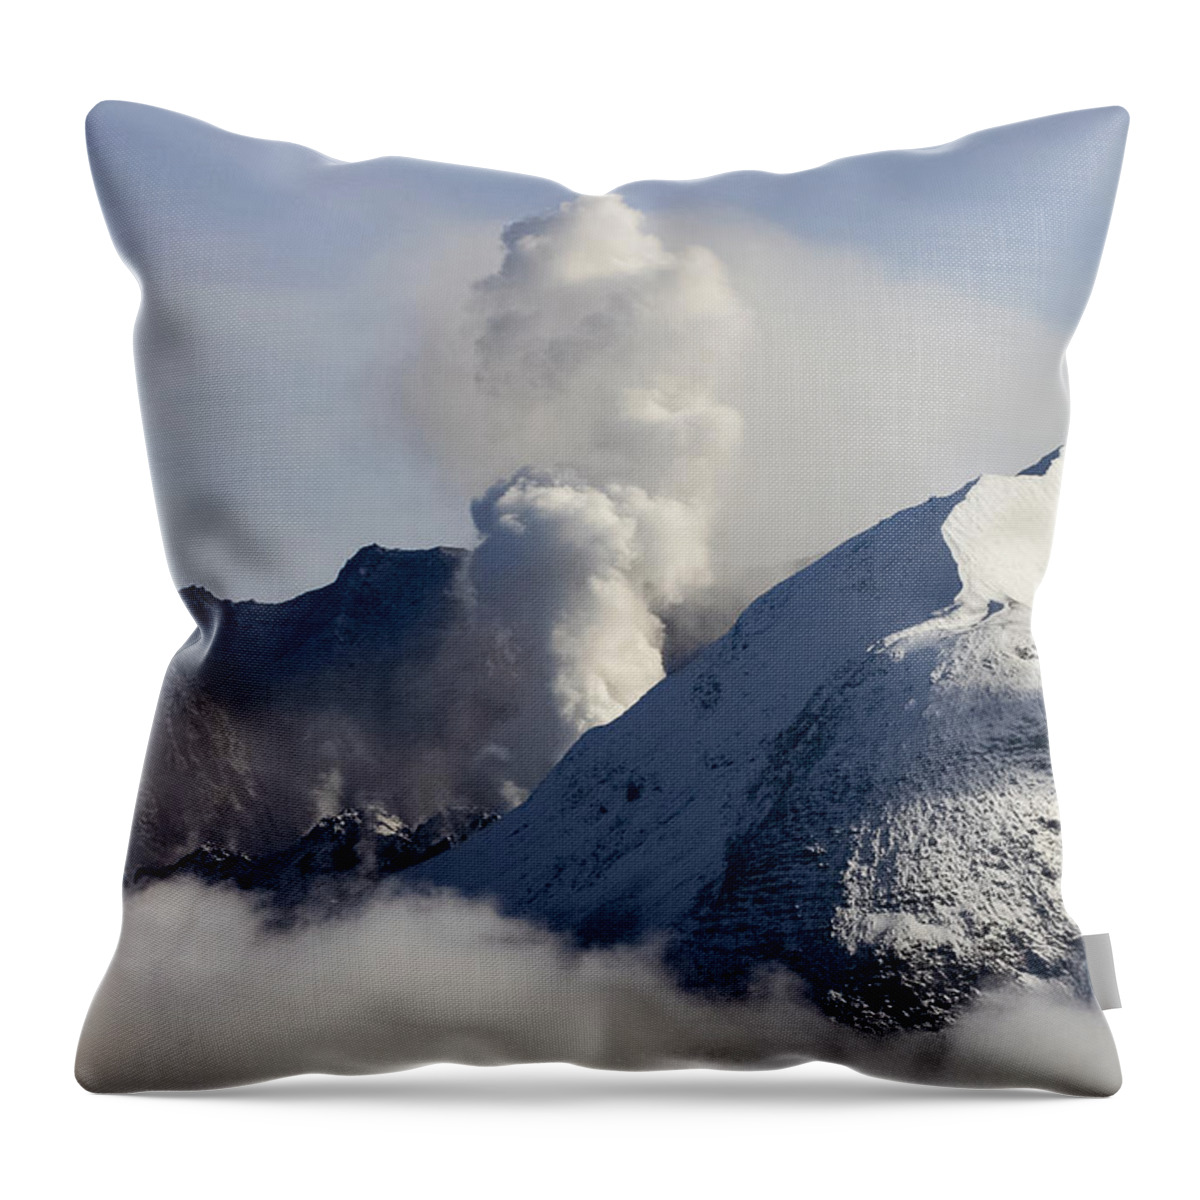 St Helens Rumble Throw Pillow featuring the photograph St Helens Rumble by Wes and Dotty Weber